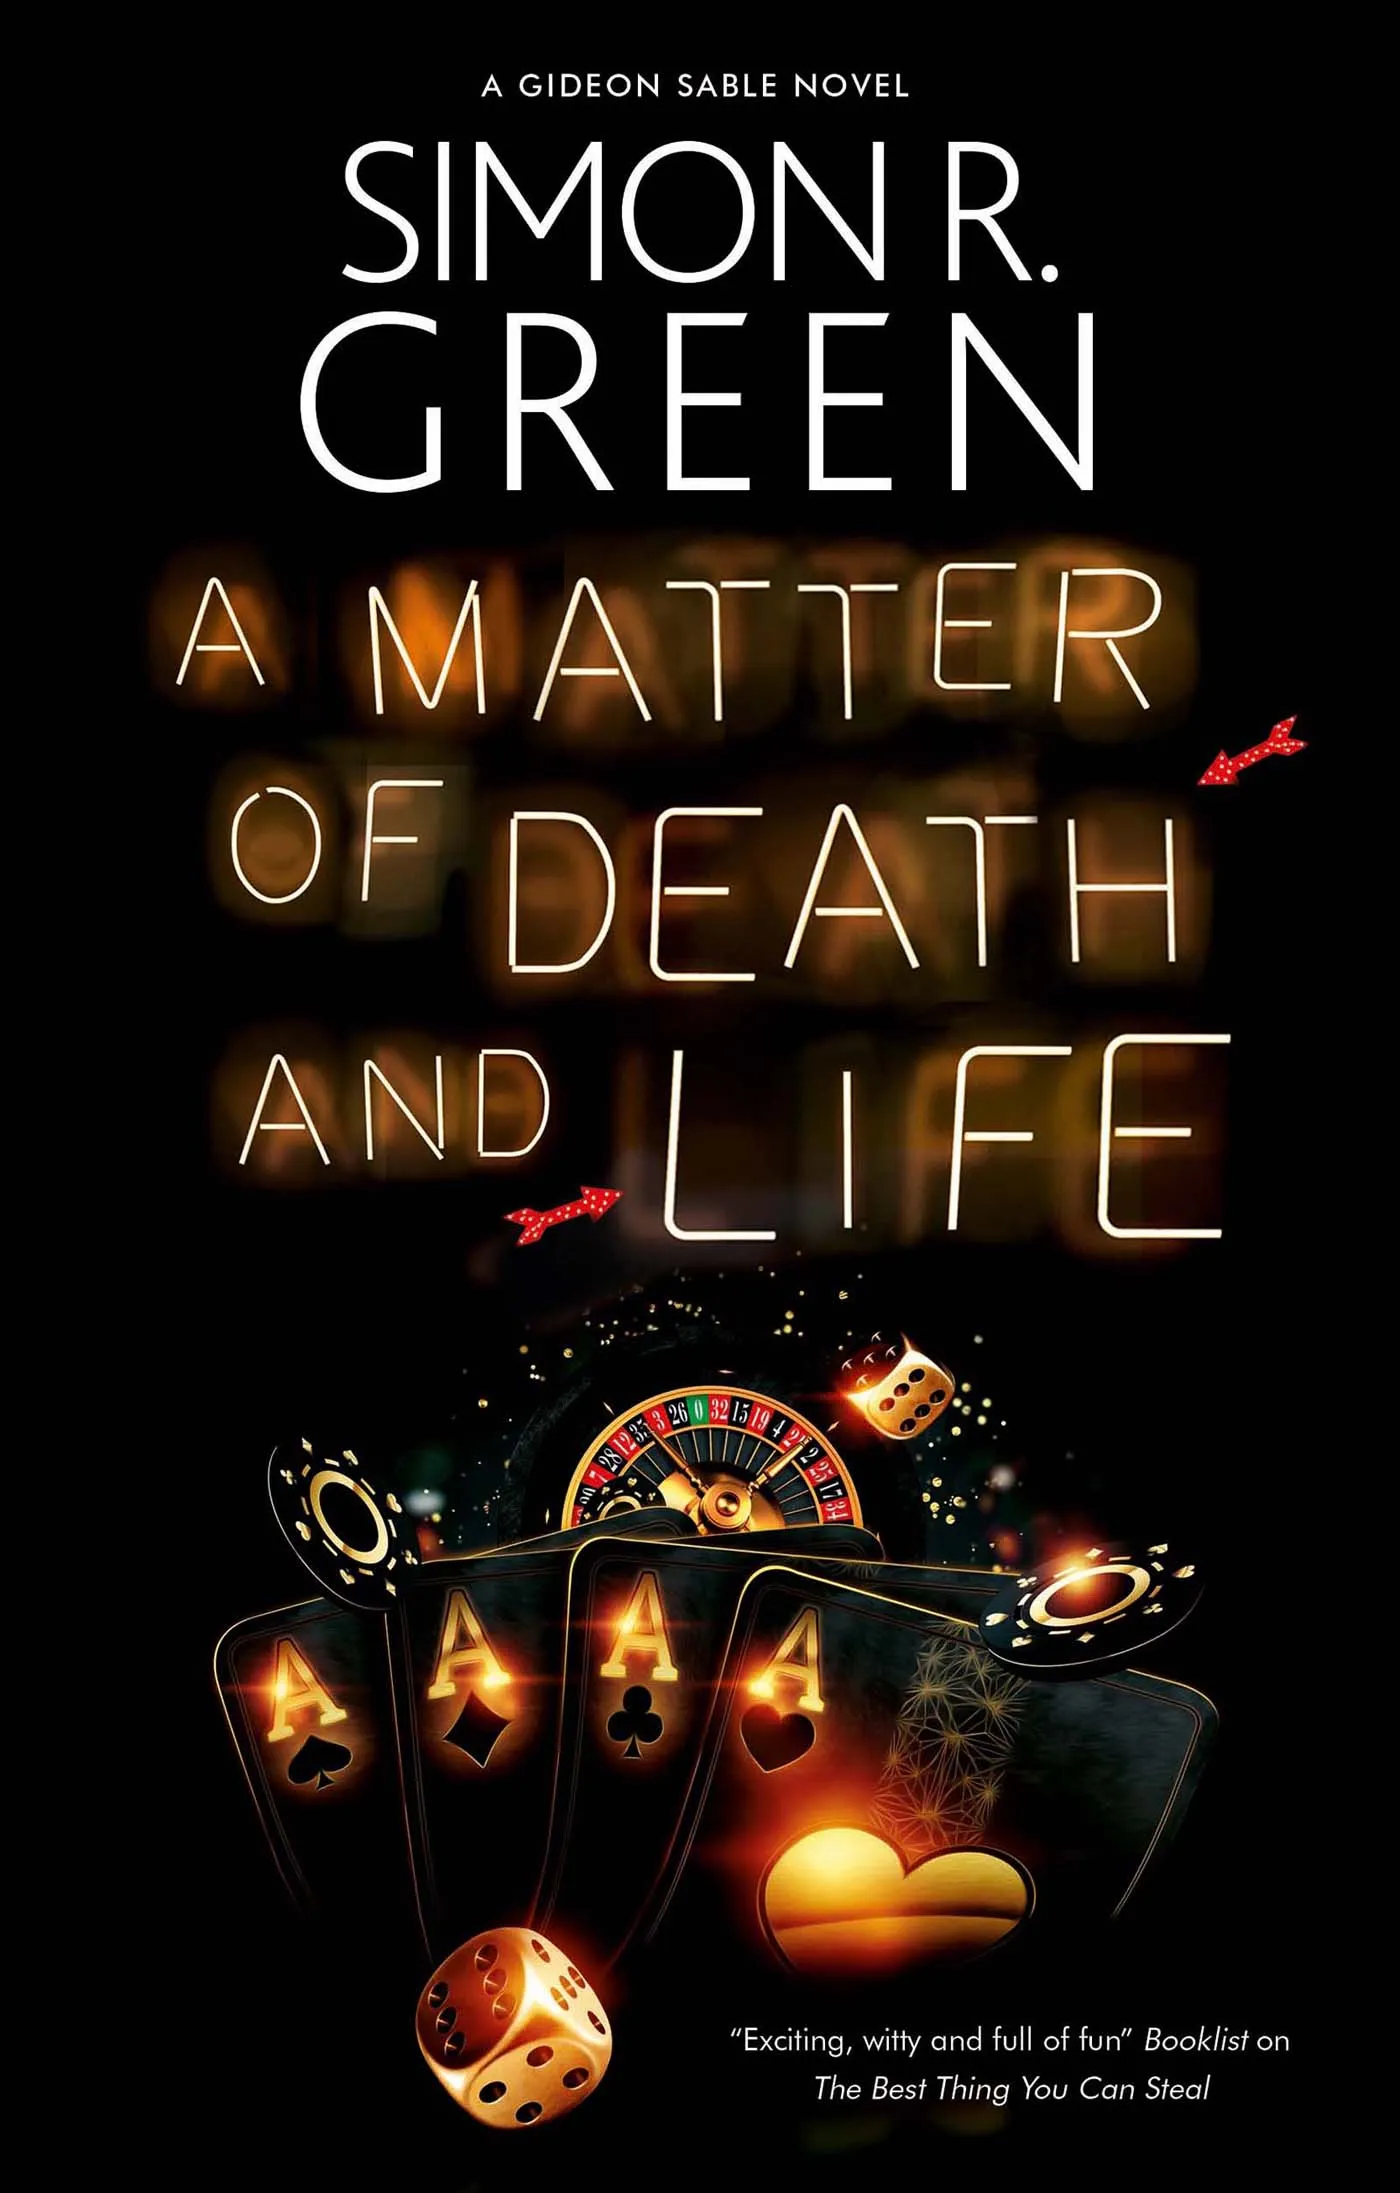 A Matter of Death and Life (Gideon Sable #2)